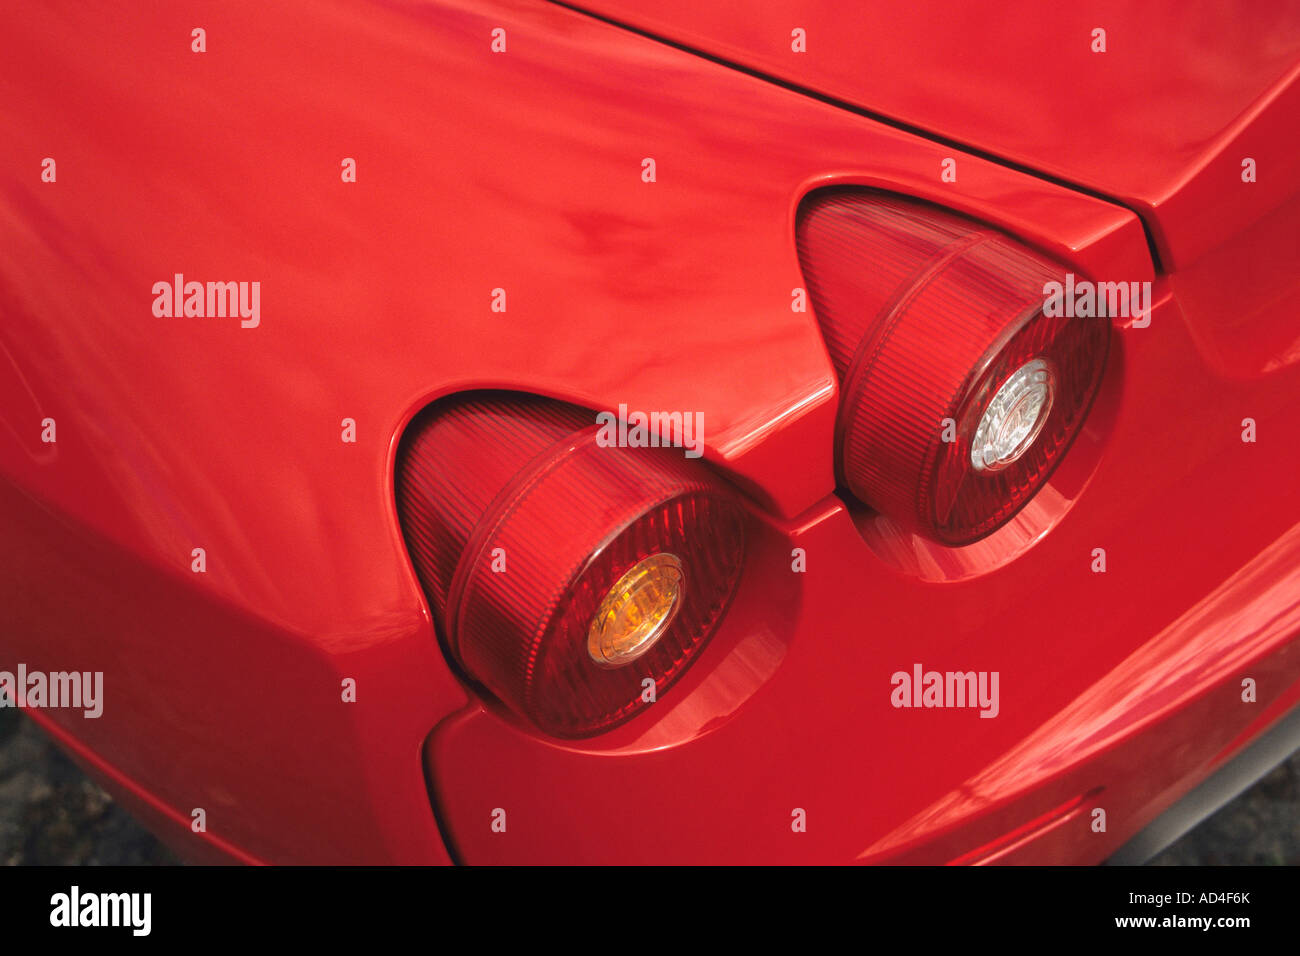 Tail lights on a red sports car Stock Photo